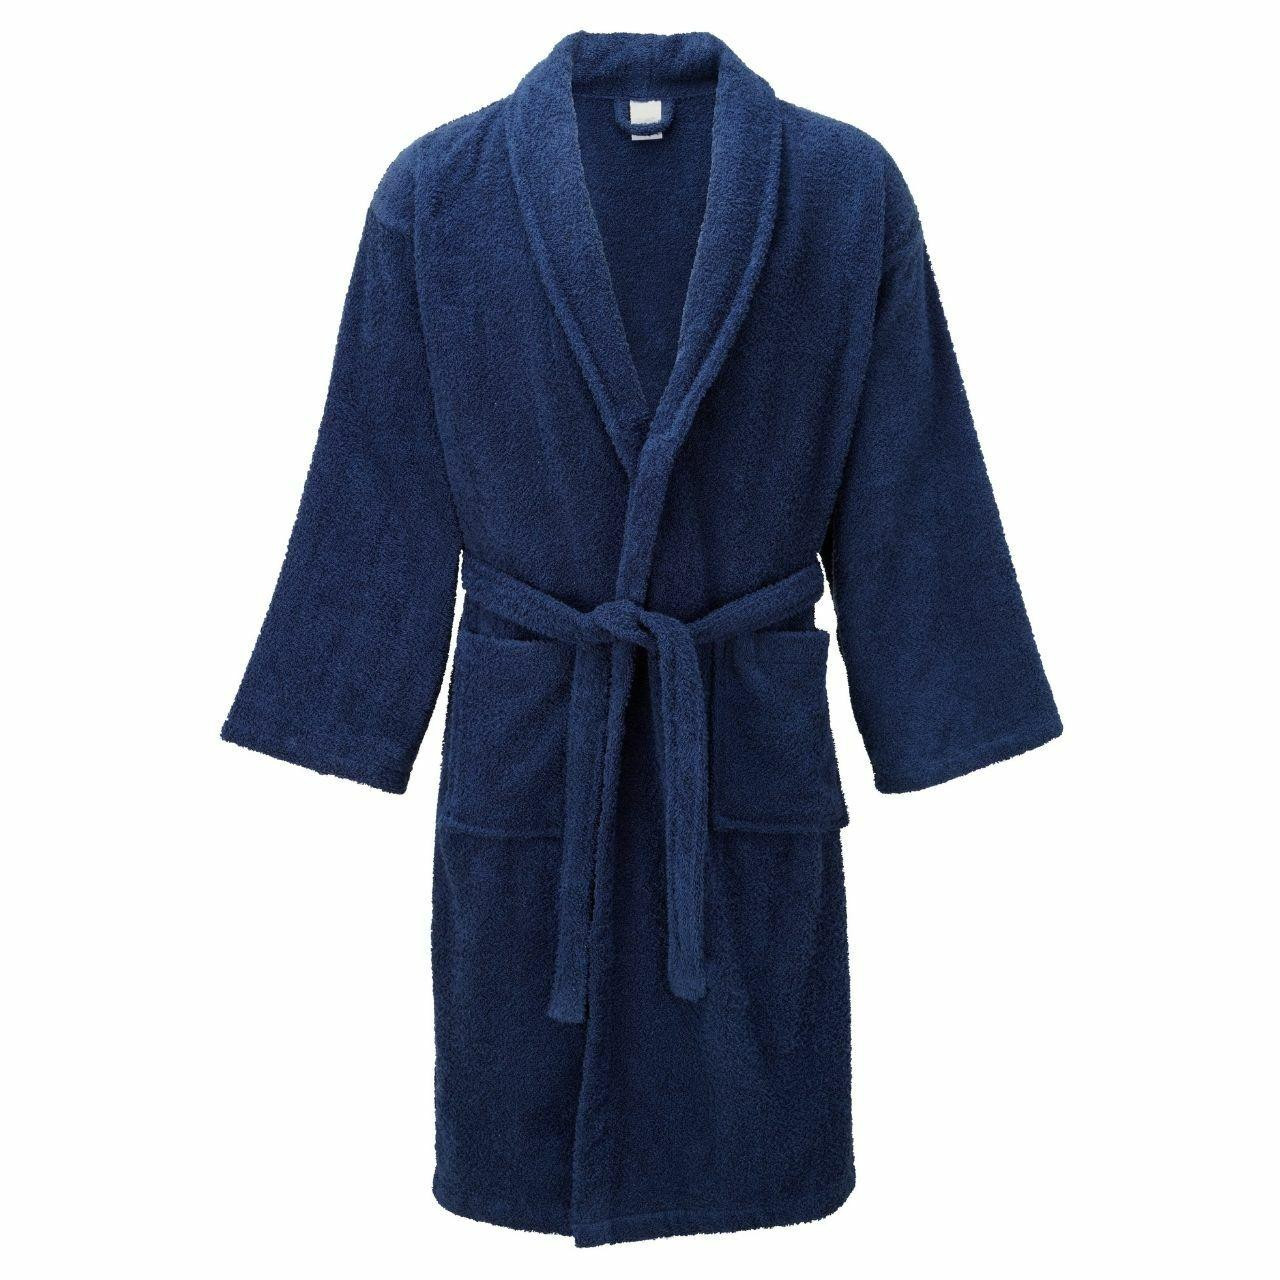 Unisex 100% Luxury Egyptian Cotton Super Soft Velour Towelling Bath Robe Dressing Gowns Bathrobe Terry Towel Housecoat Nightwear Lounge Wears With Pockets And Belt 